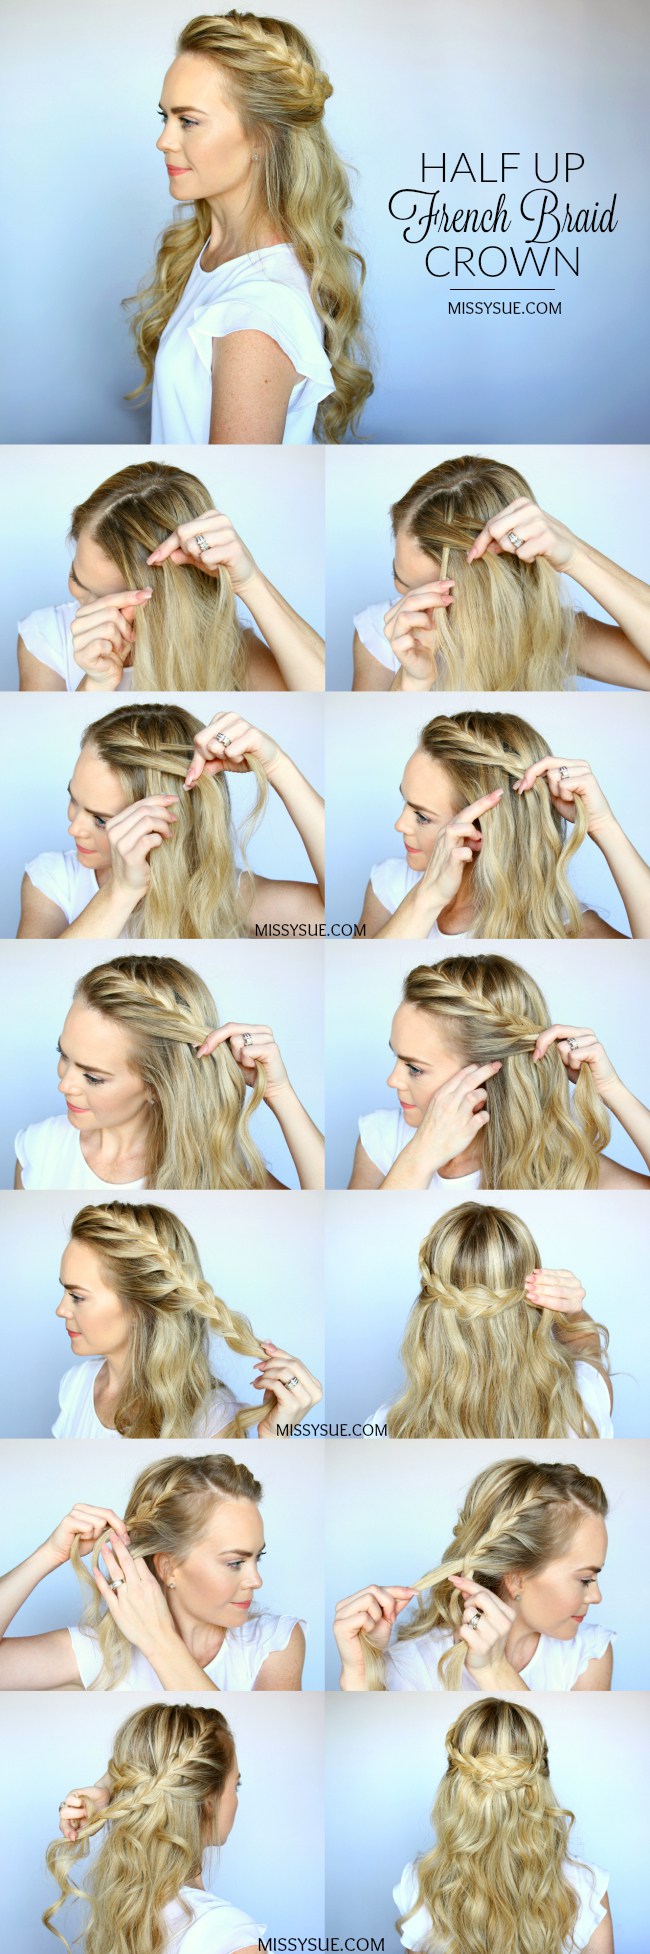 15 Braided Hair Tutorials You Should Copy Till The End Of The Summer